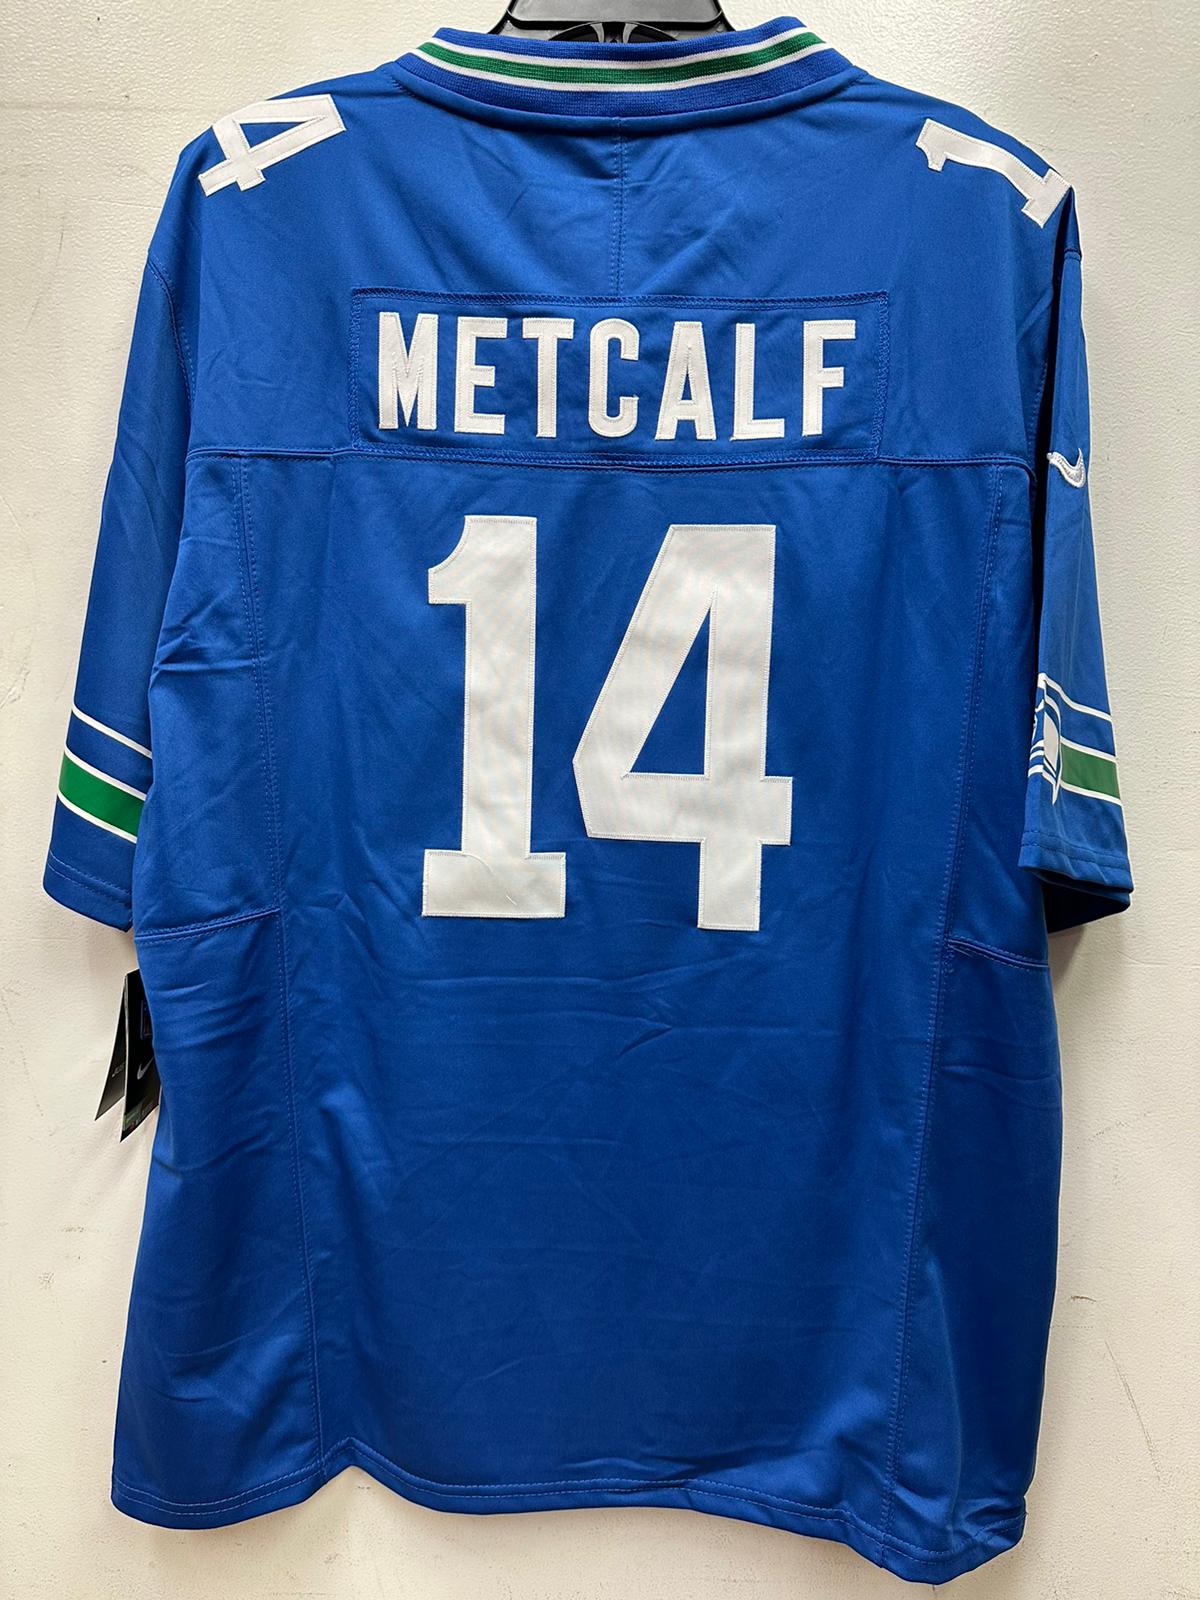 Seattle Seahawks DK Metcalf Royal Throwback Limited Jersey